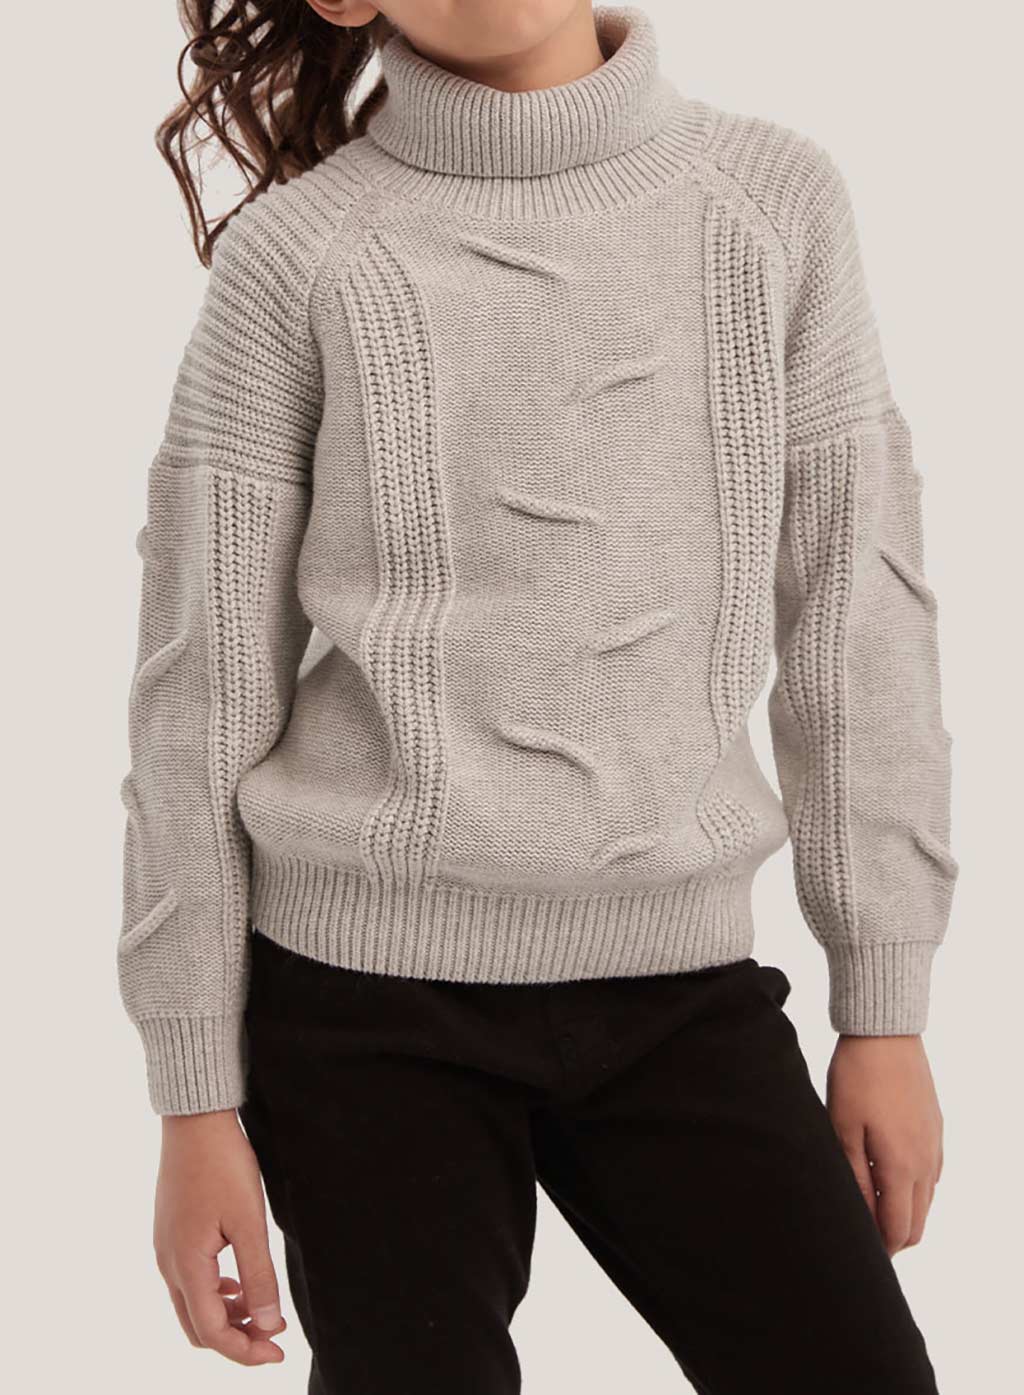 Girls Turtleneck Cable Sweater